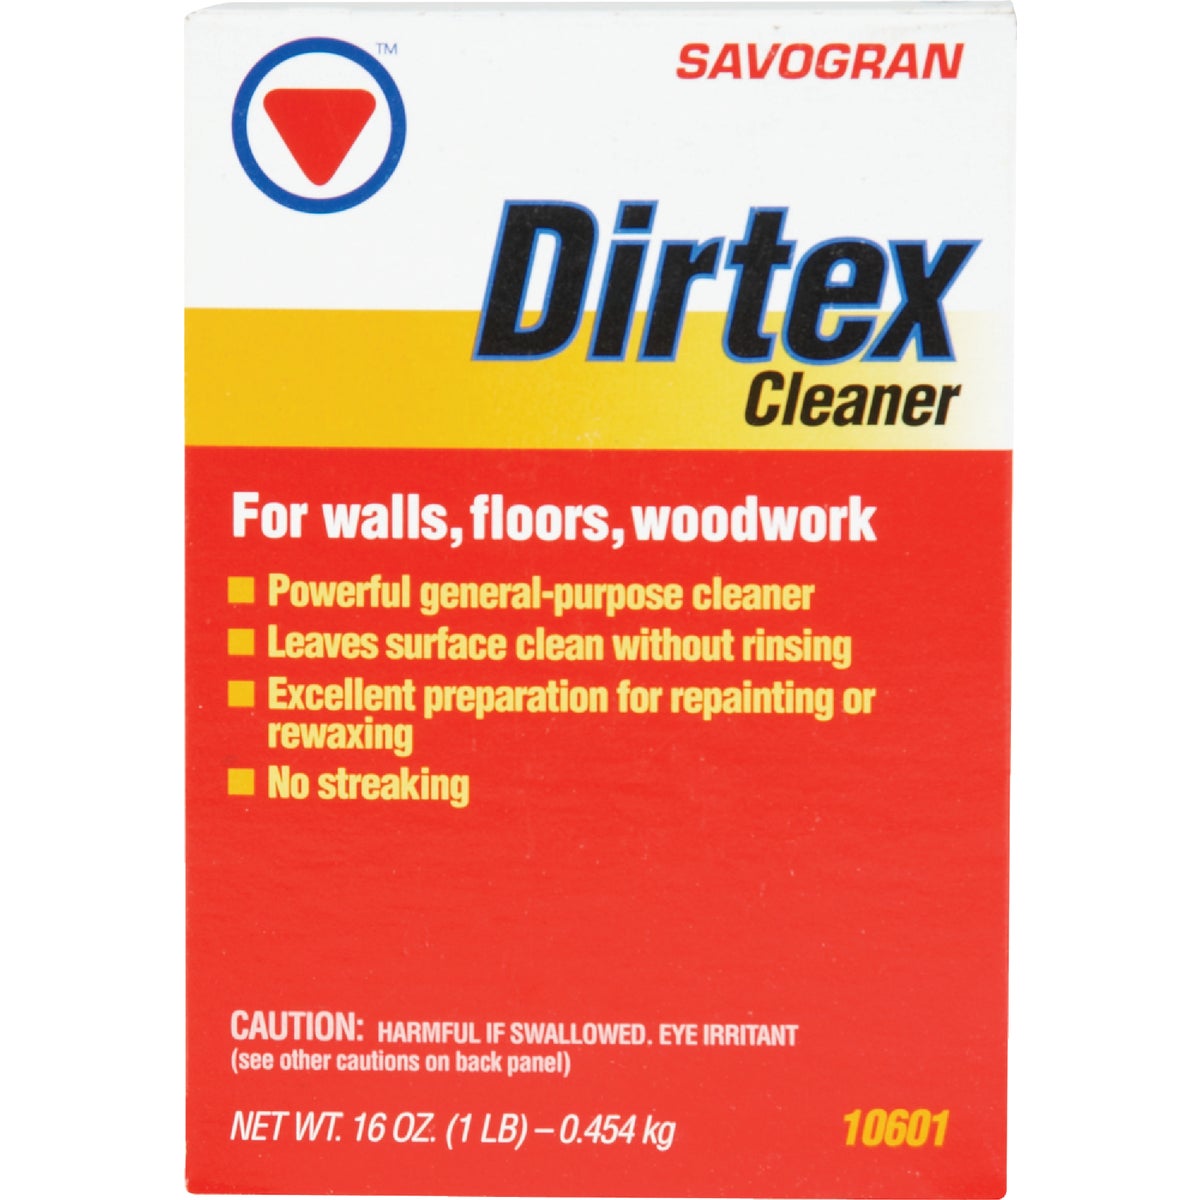 Item 775352, A fast acting cleaner formulated for use on every washable surface in the 